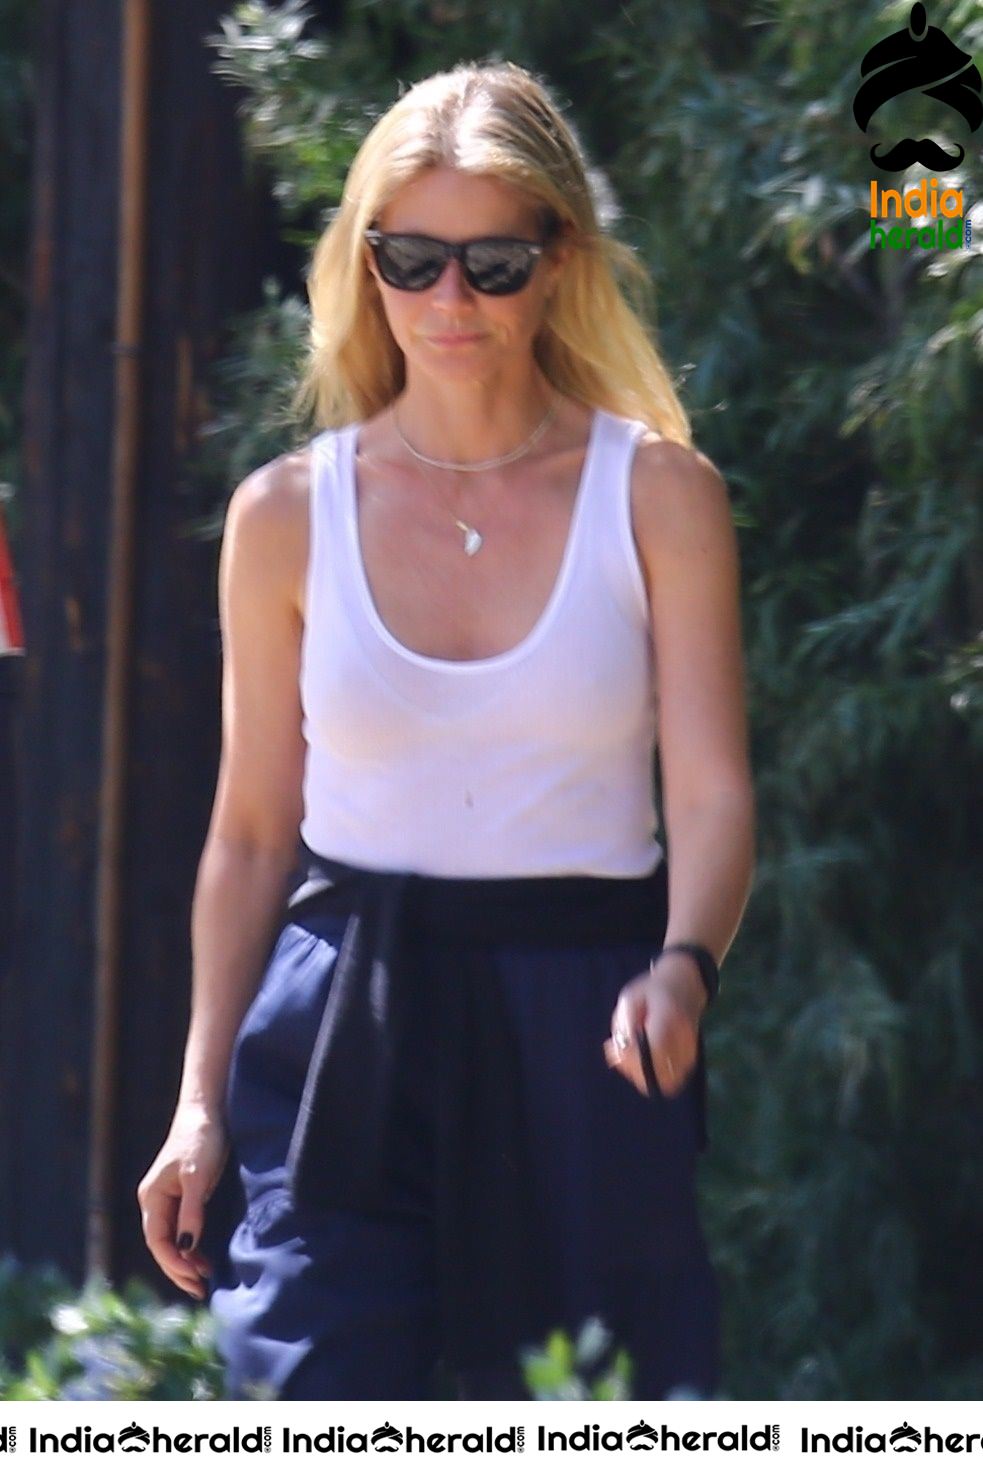 Gwyneth Paltrow Steps out on a sunny Sunday for a weekend walk in Brentwood